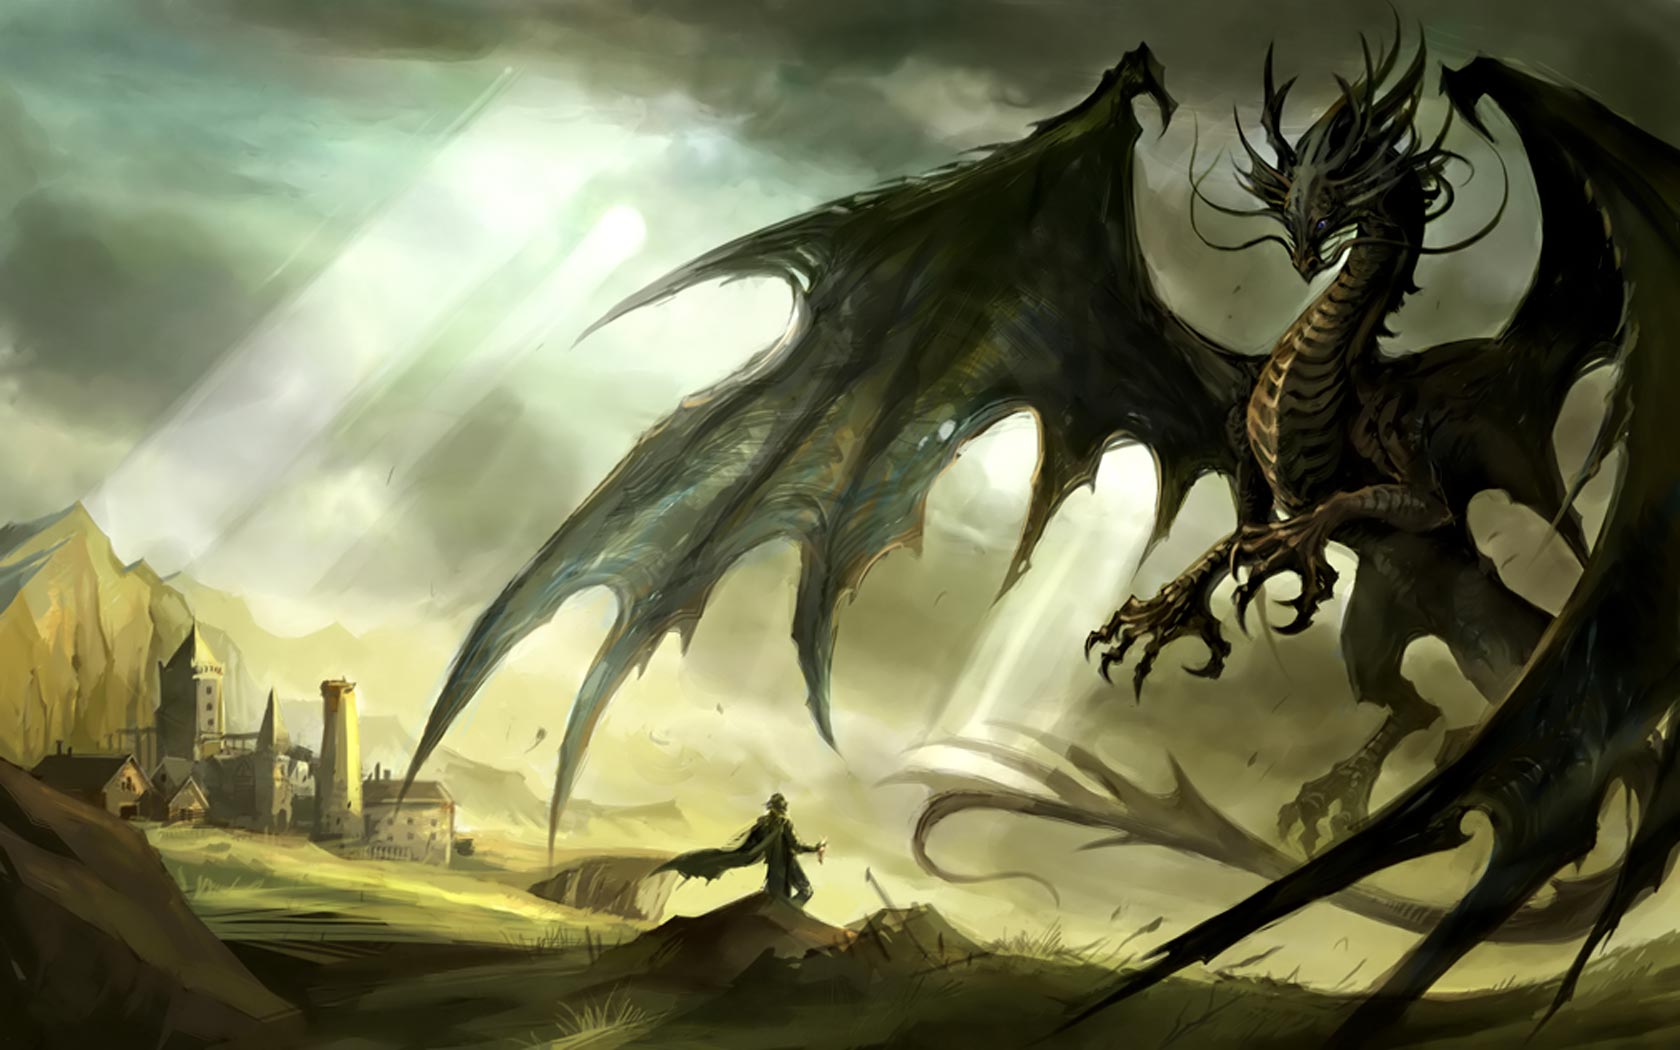 Awesome Dragon Desktop Wallpaper Share This